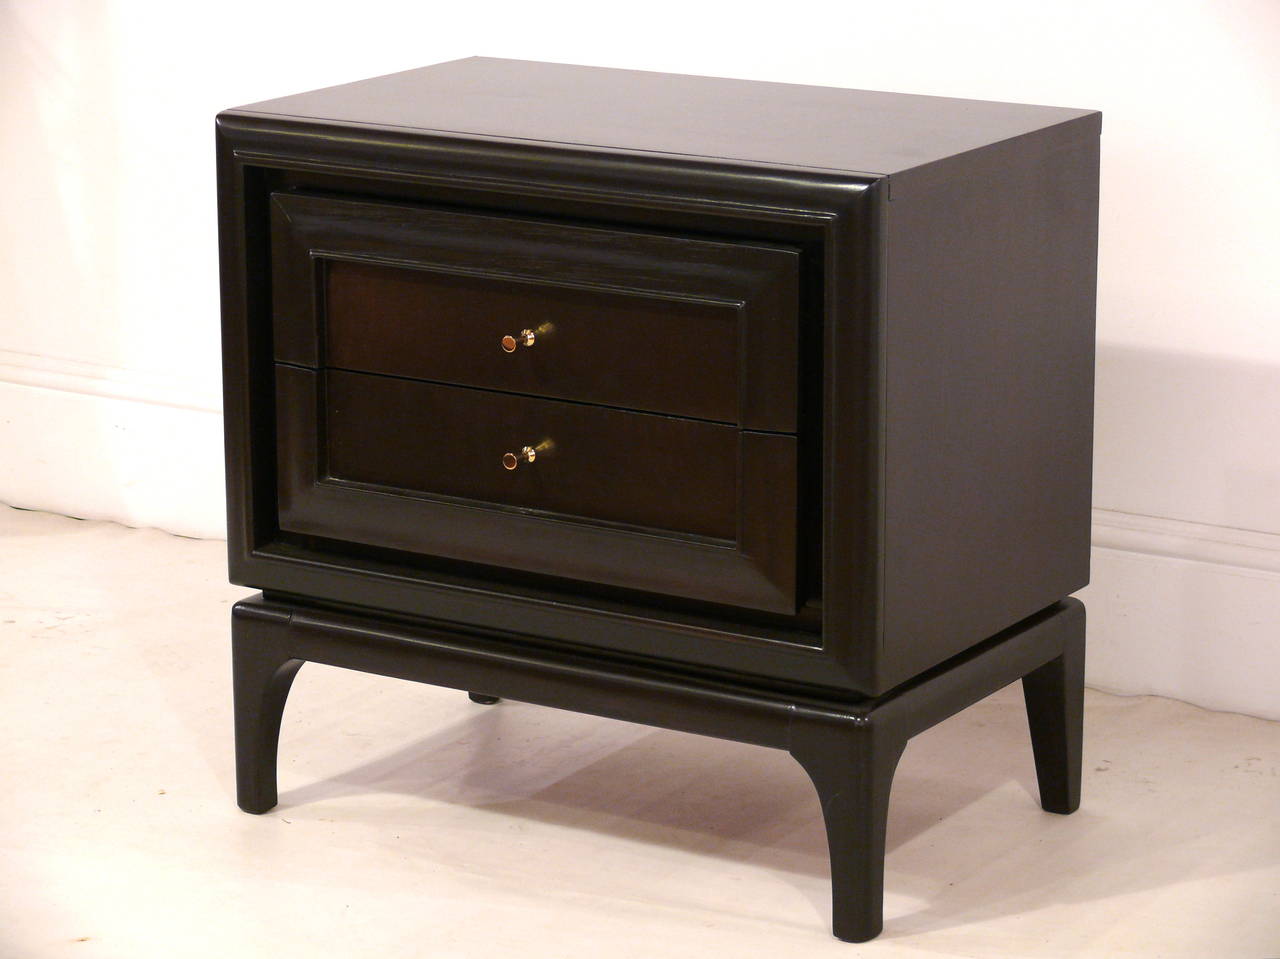 Mid-Century Modern two-drawer end tables with projected outer frames. The case rests over beautifully sculpted legs. Newly refinished in a deep satin finished espresso over walnut.